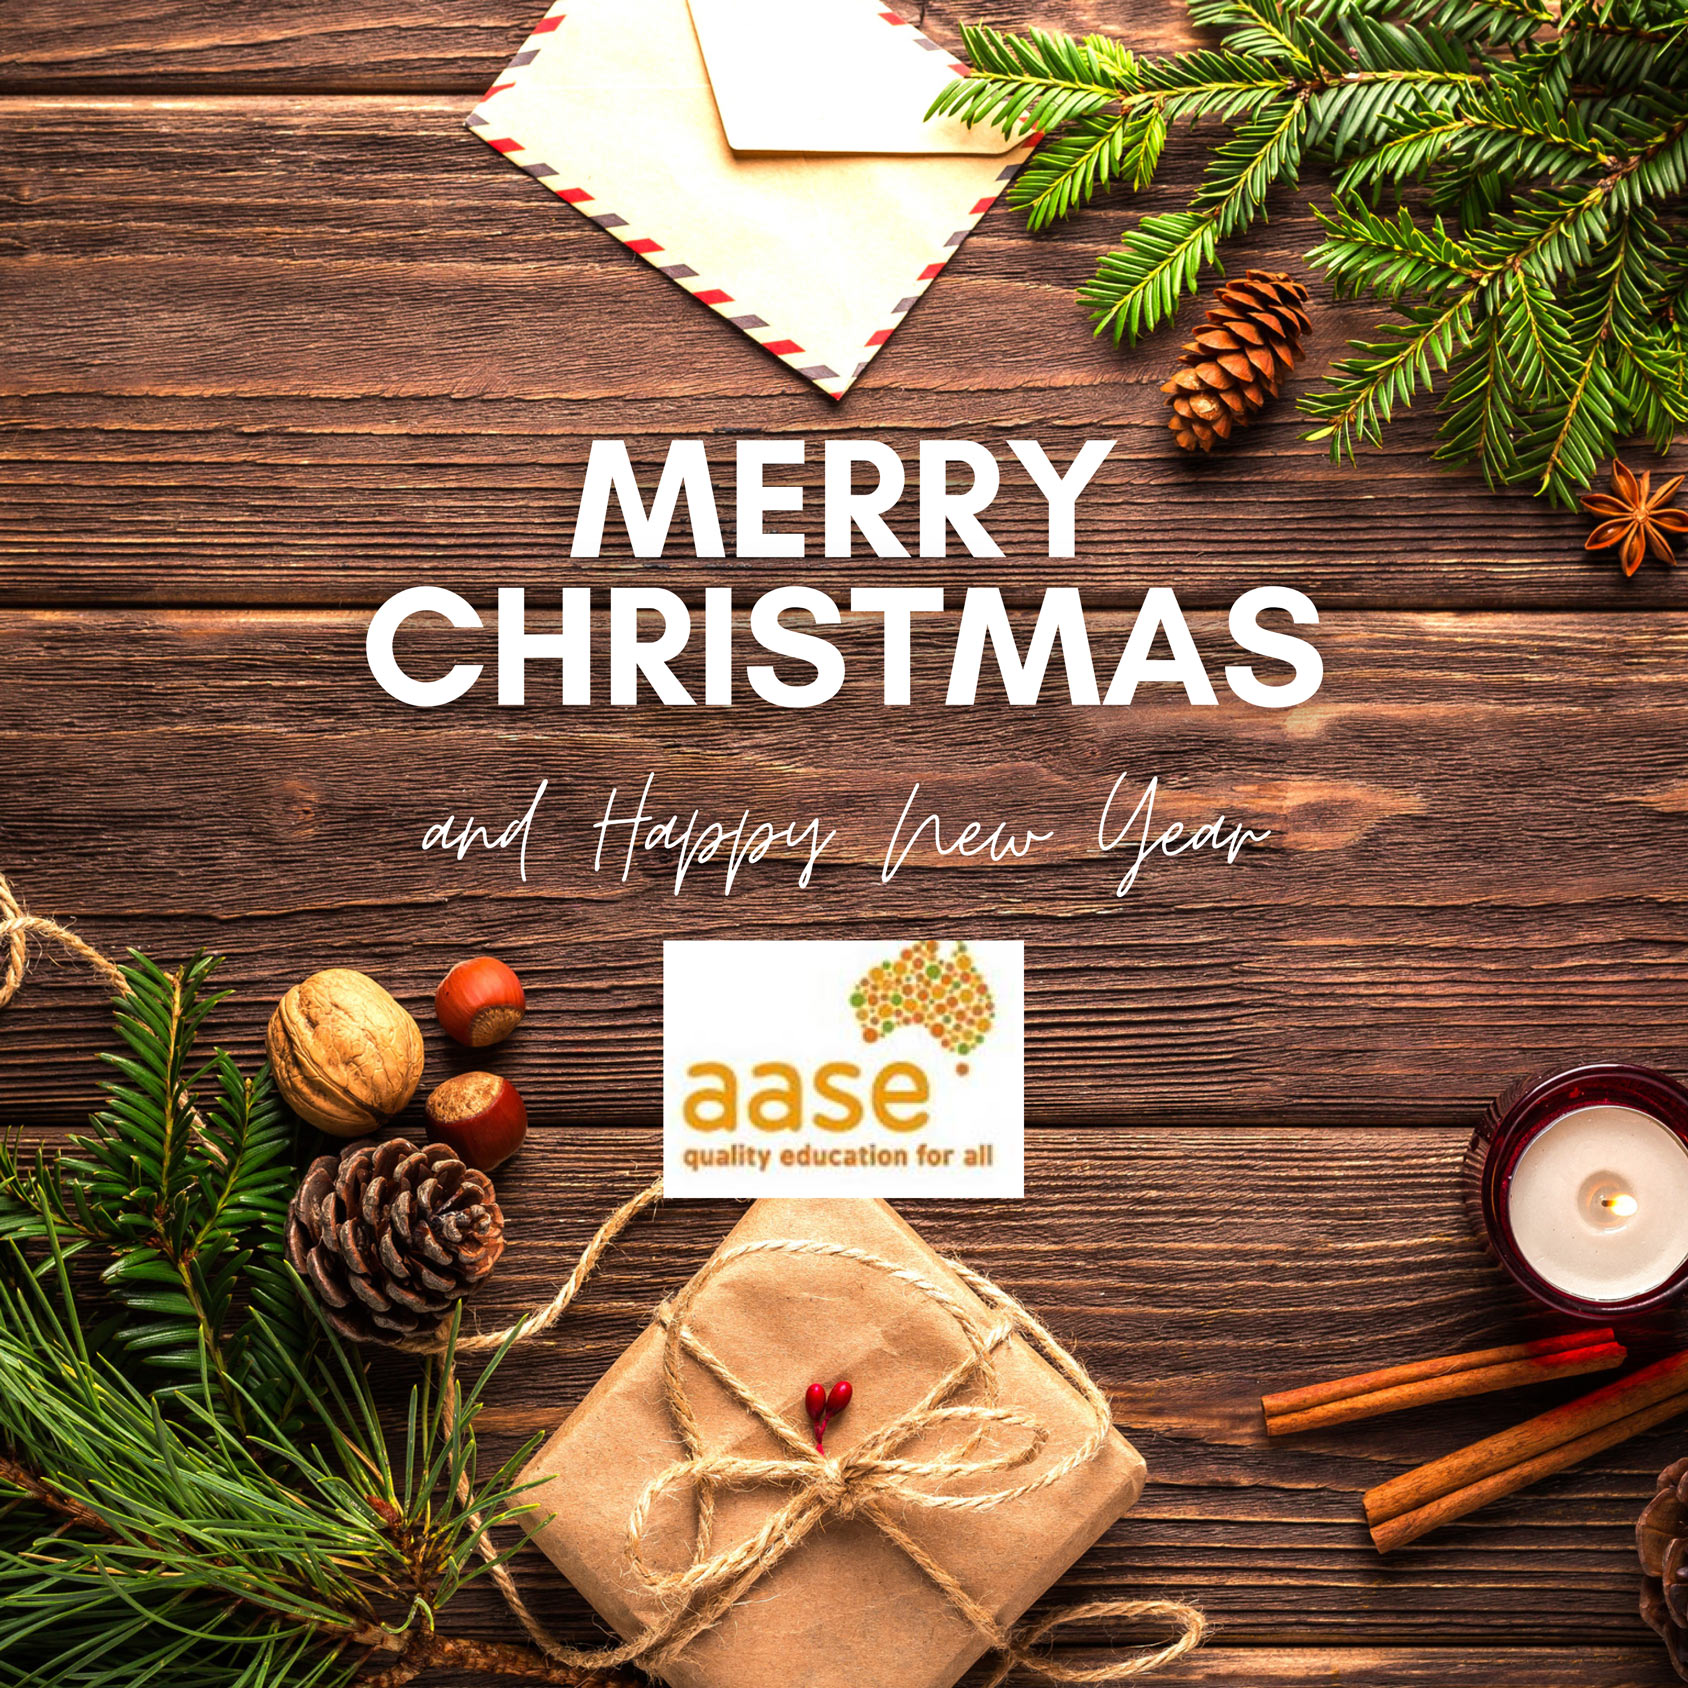 Merry Christmas from the AASE